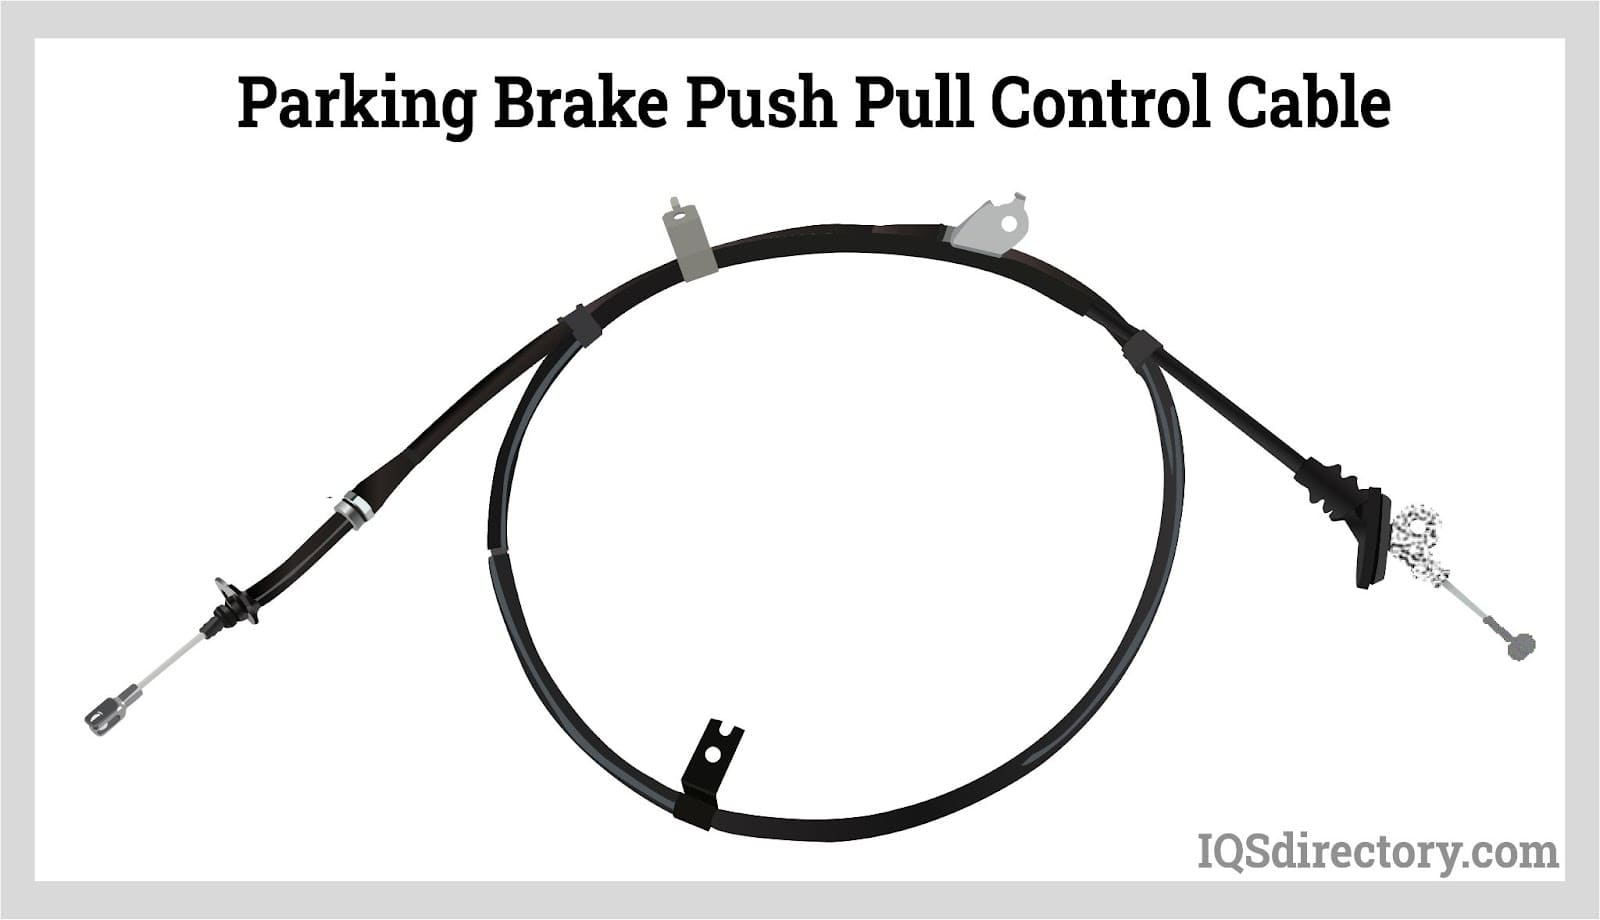 Parking Brake Push Pull Control Cable